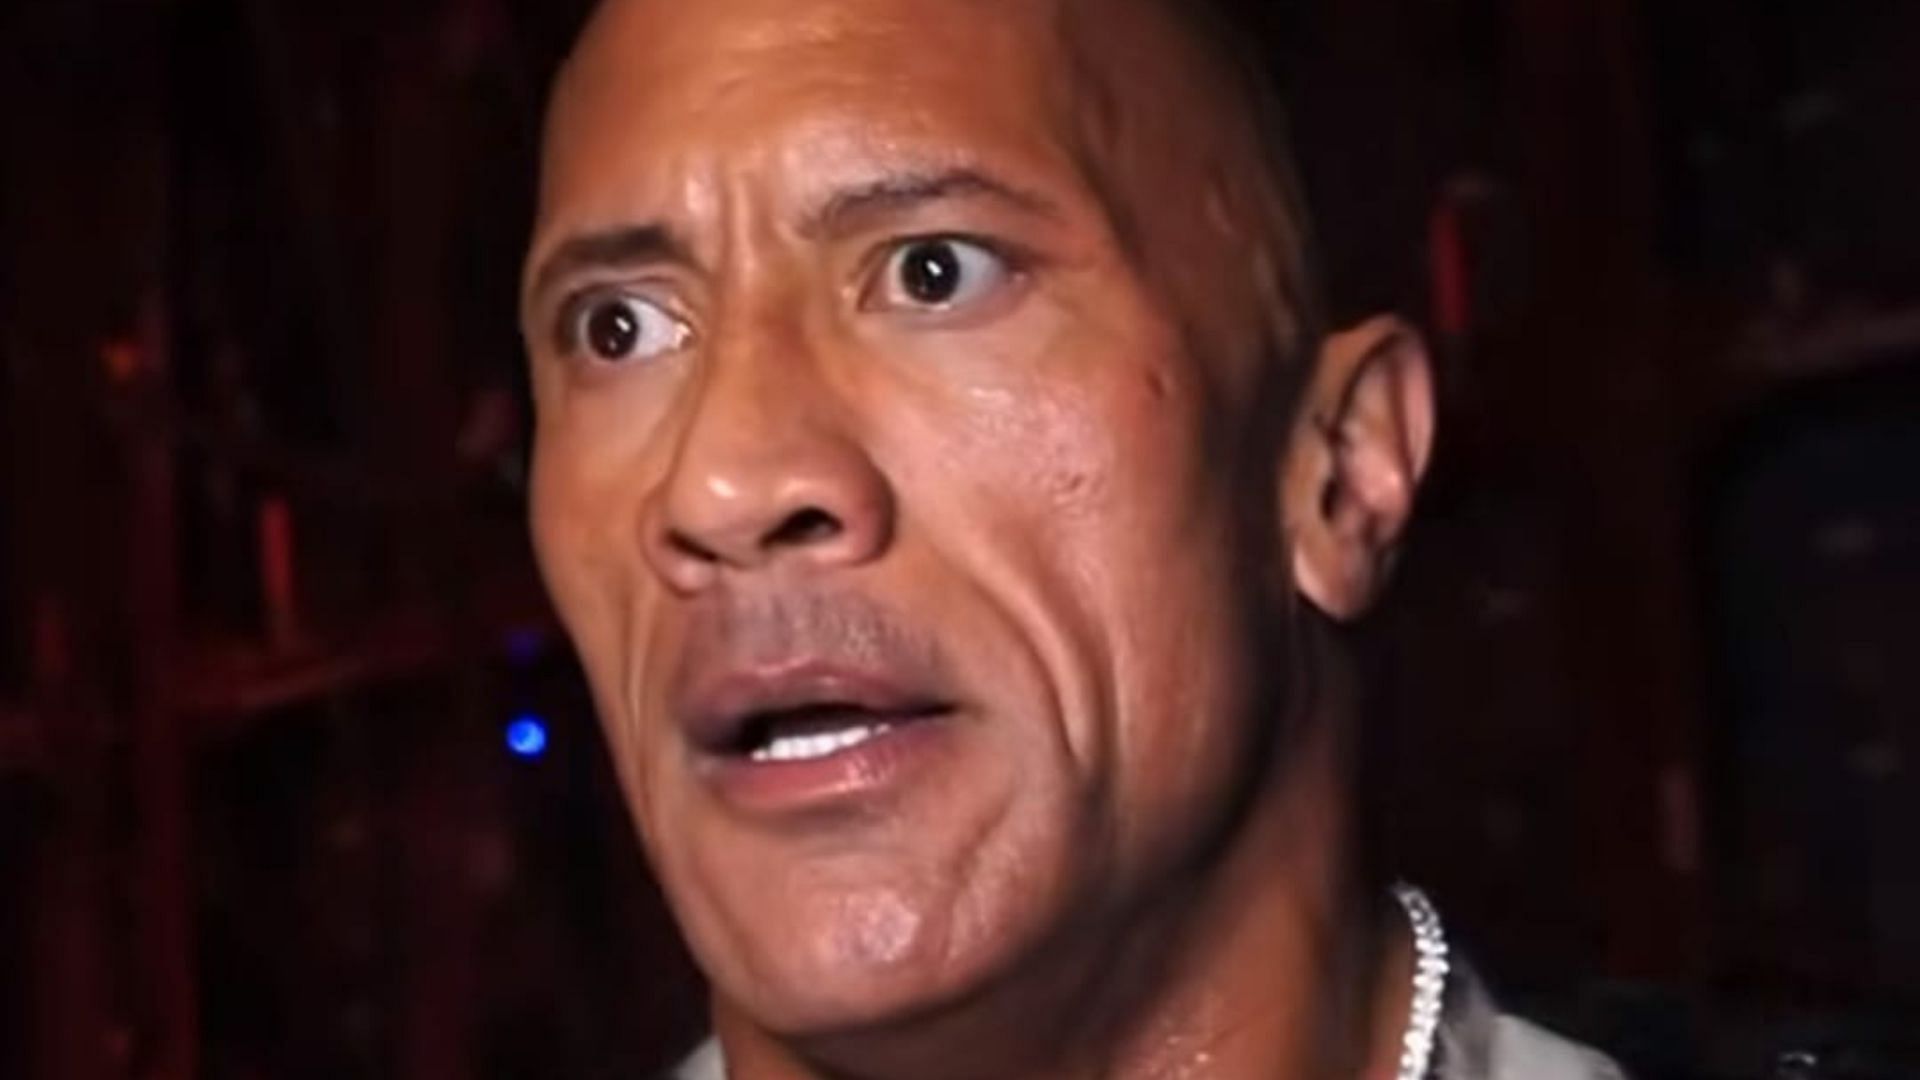 The Rock is one of the biggest celebrities in the world today.